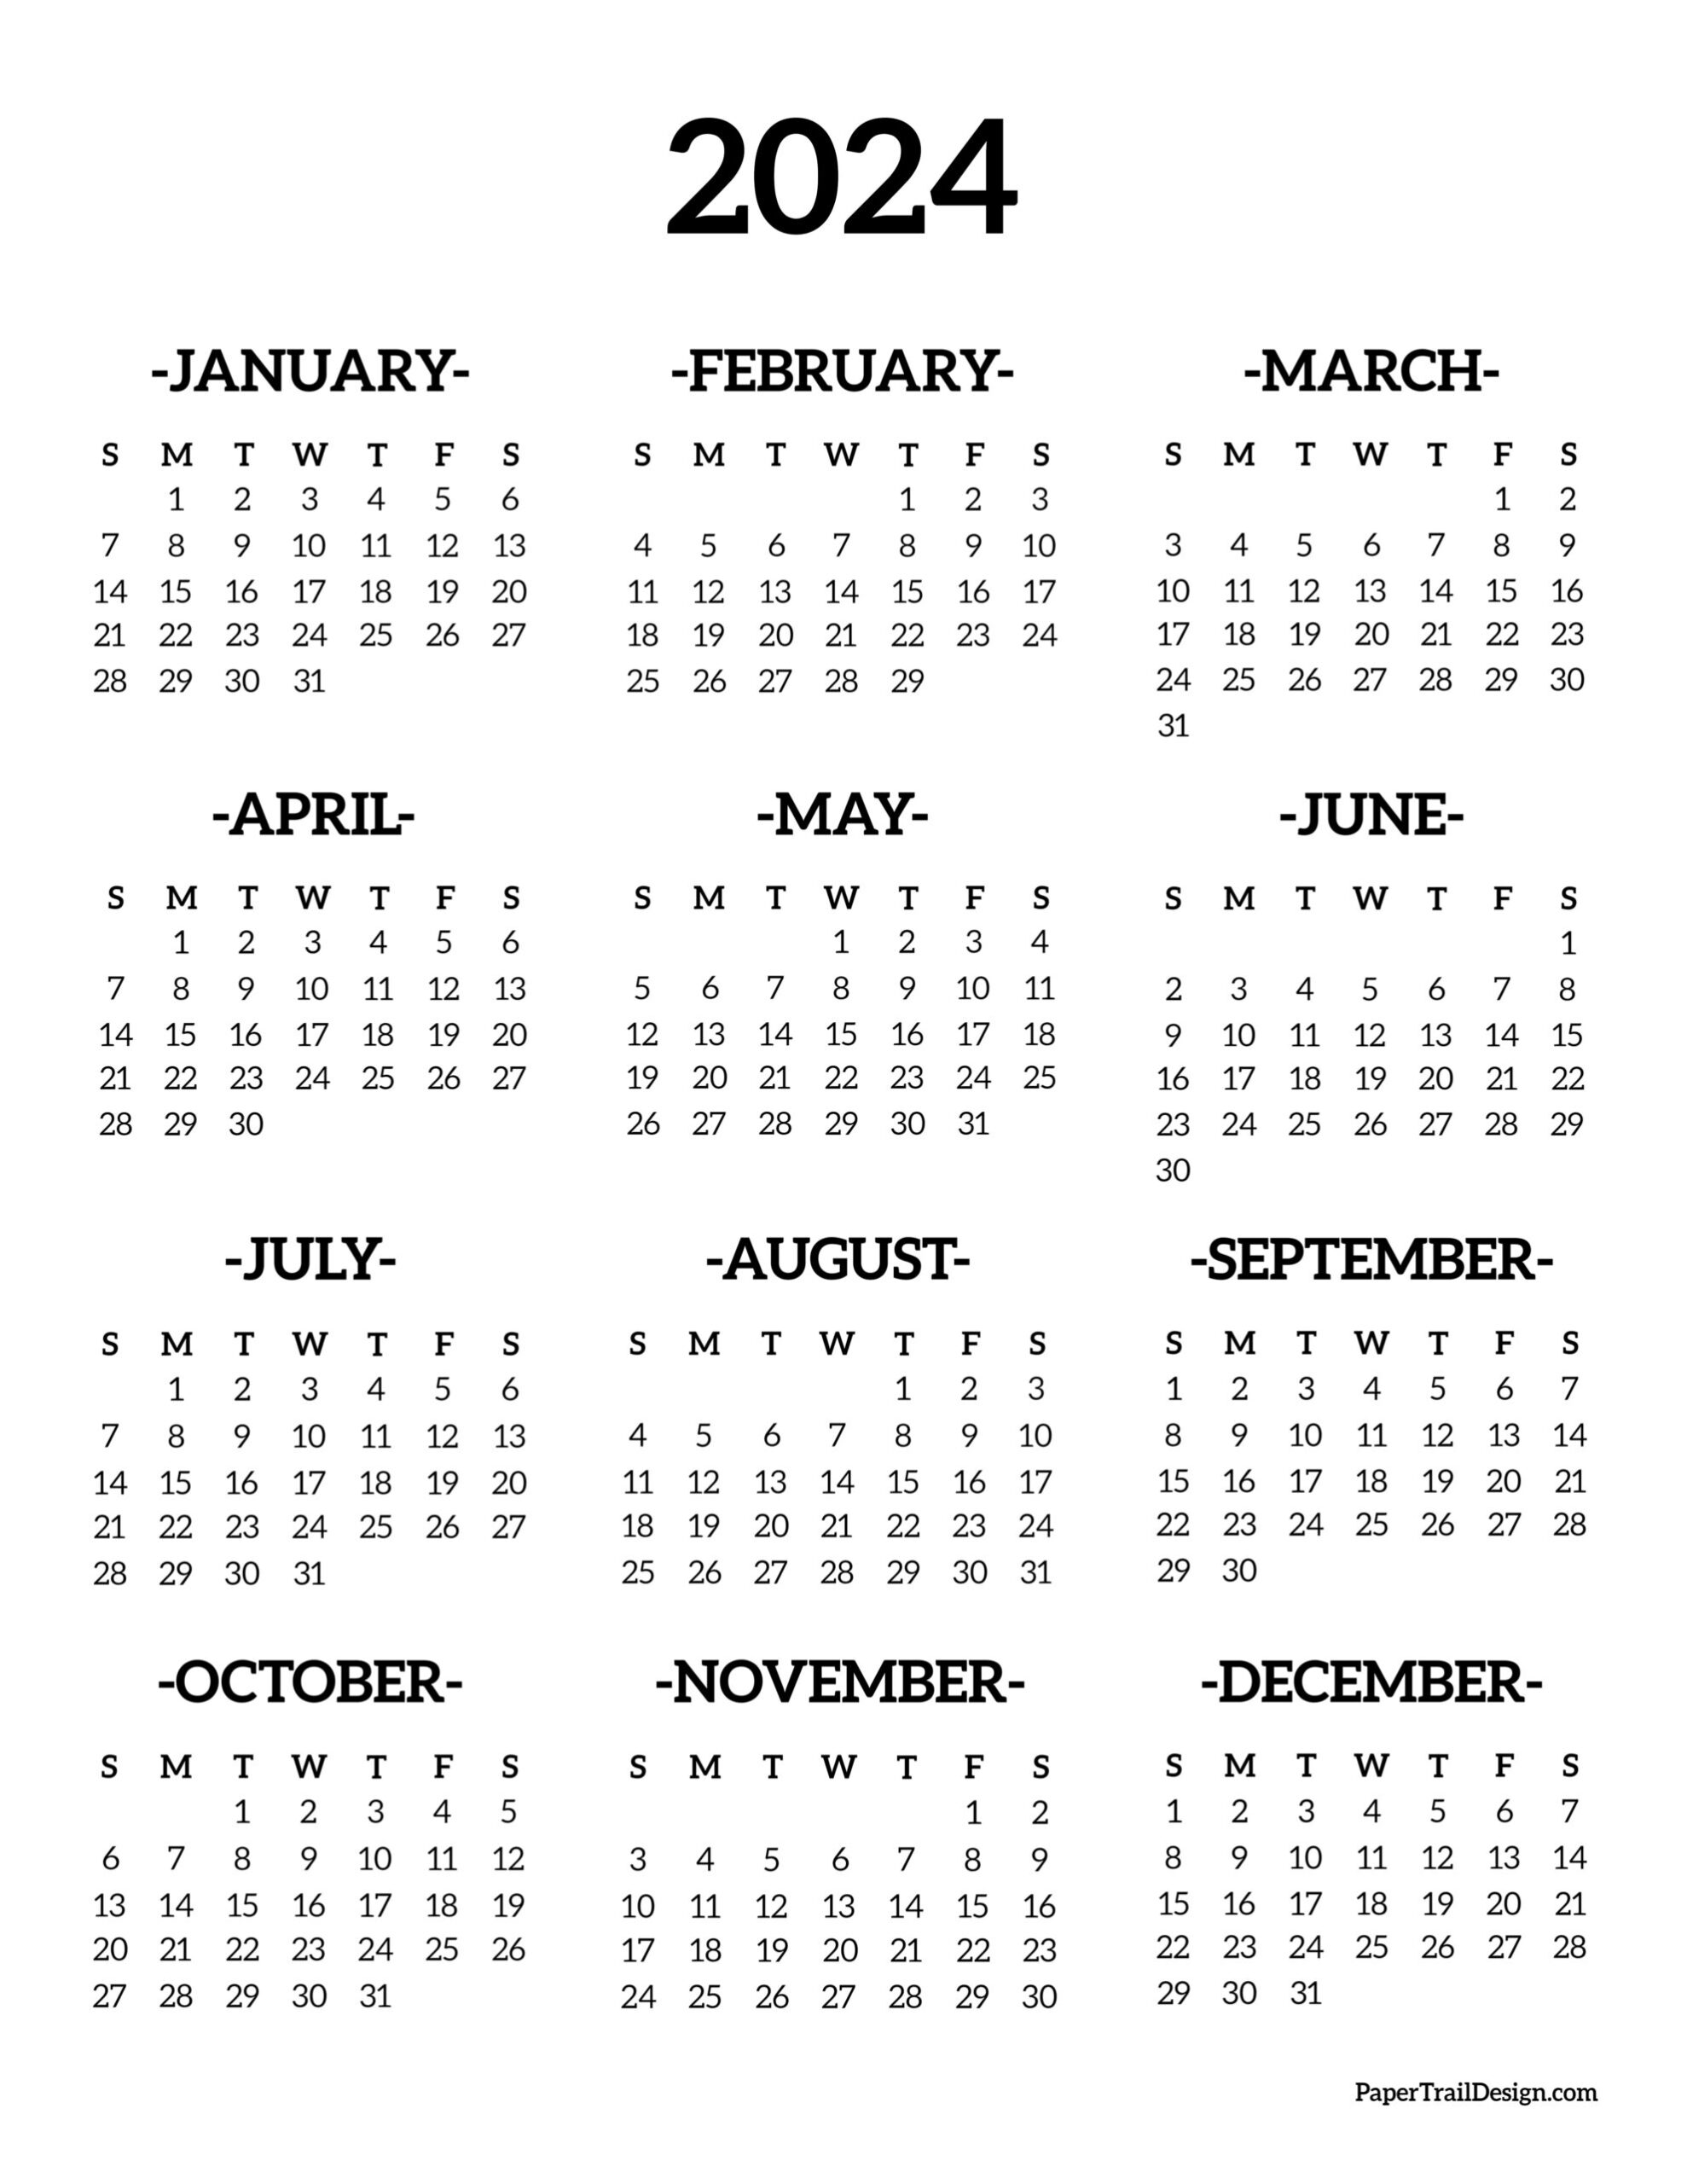 Calendar 2024 Printable One Page - Paper Trail Design for Yearly Calendar 2024 Printable One Page